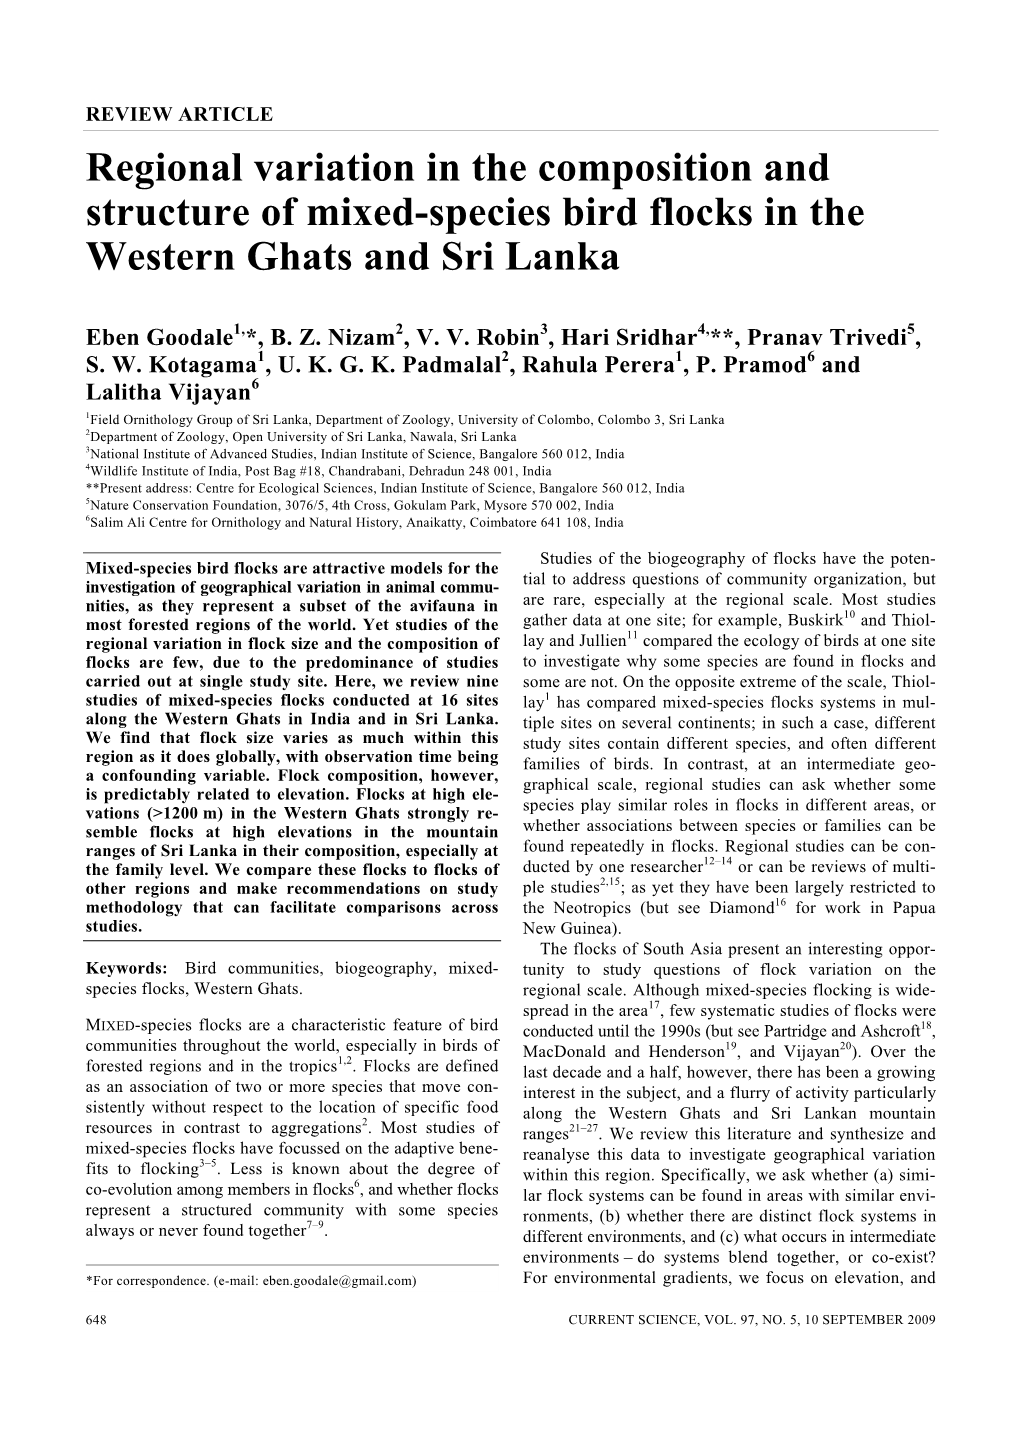 Regional Variation in the Composition and Structure of Mixed-Species Bird Flocks in the Western Ghats and Sri Lanka